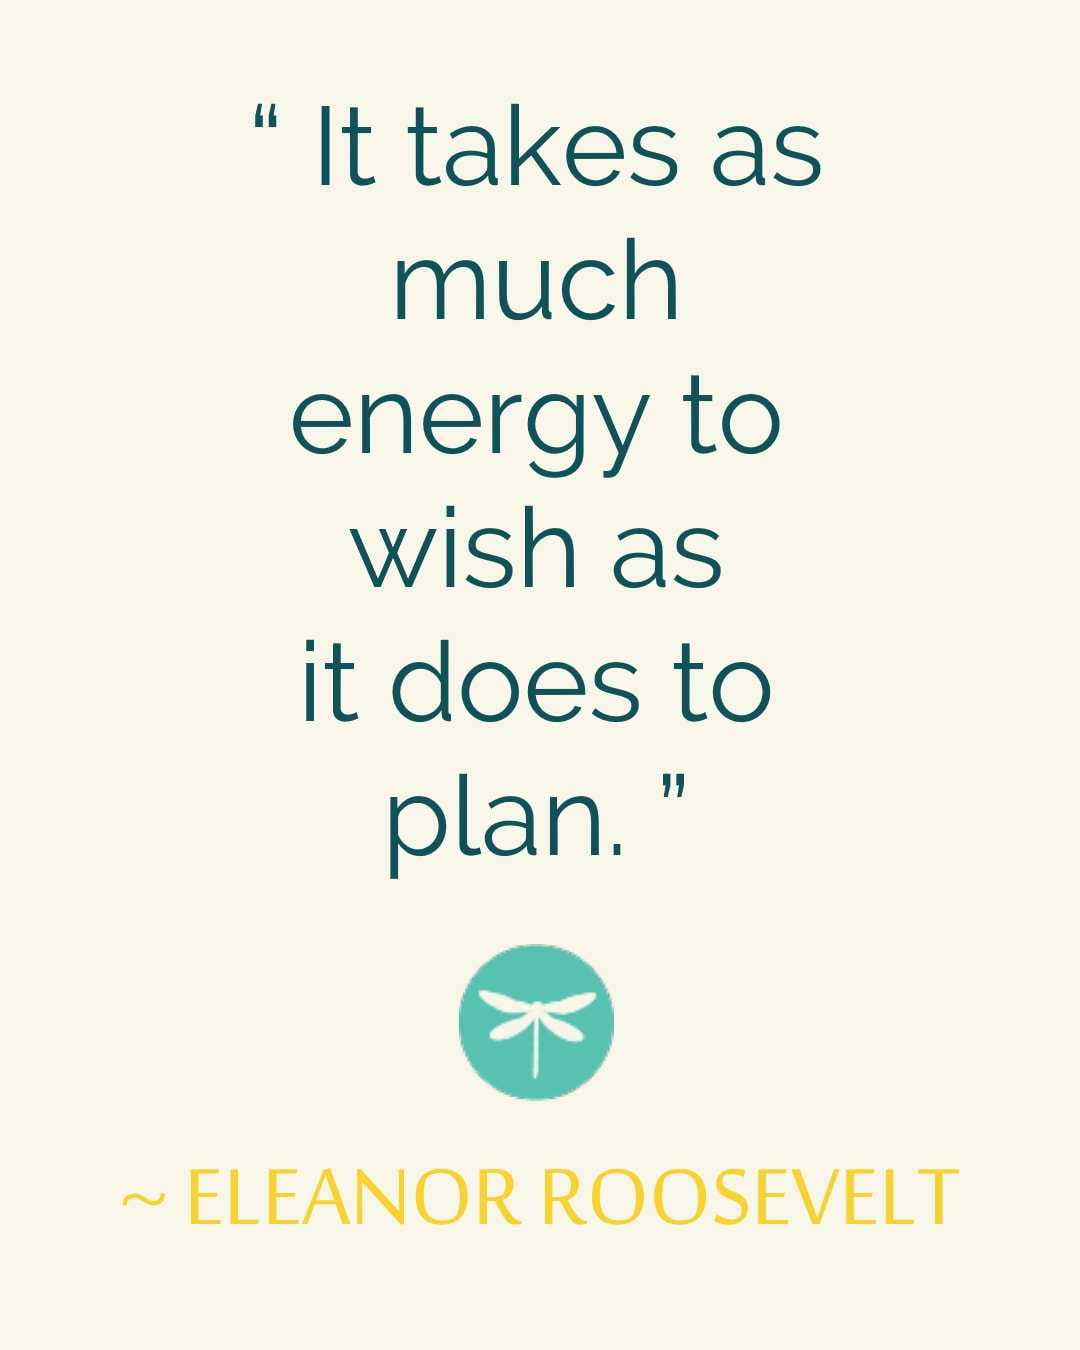 It takes as much energy to wish as it does to plan